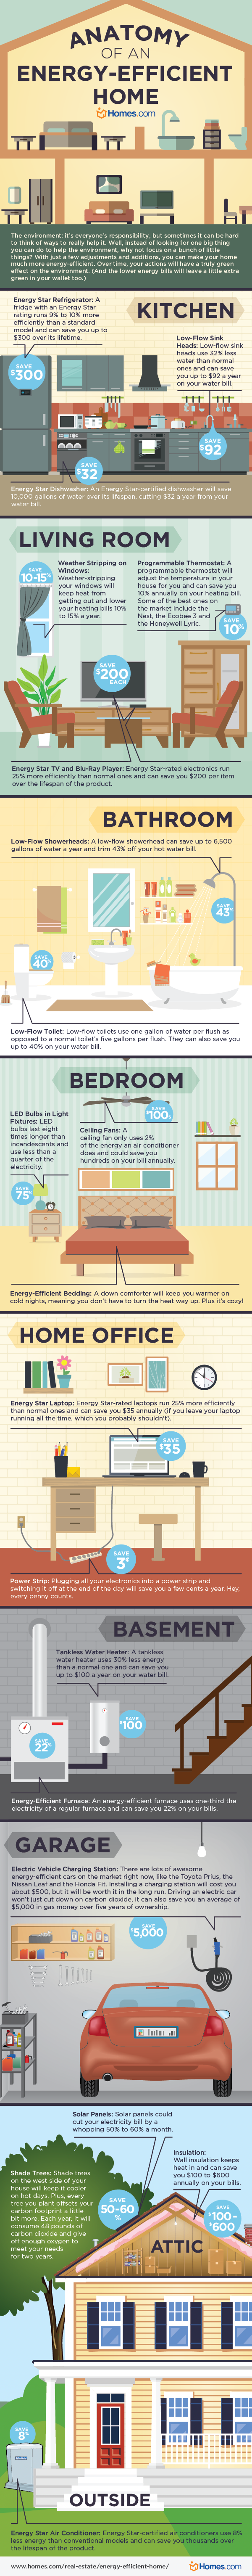 Anatomy of an Energy Efficient-Home